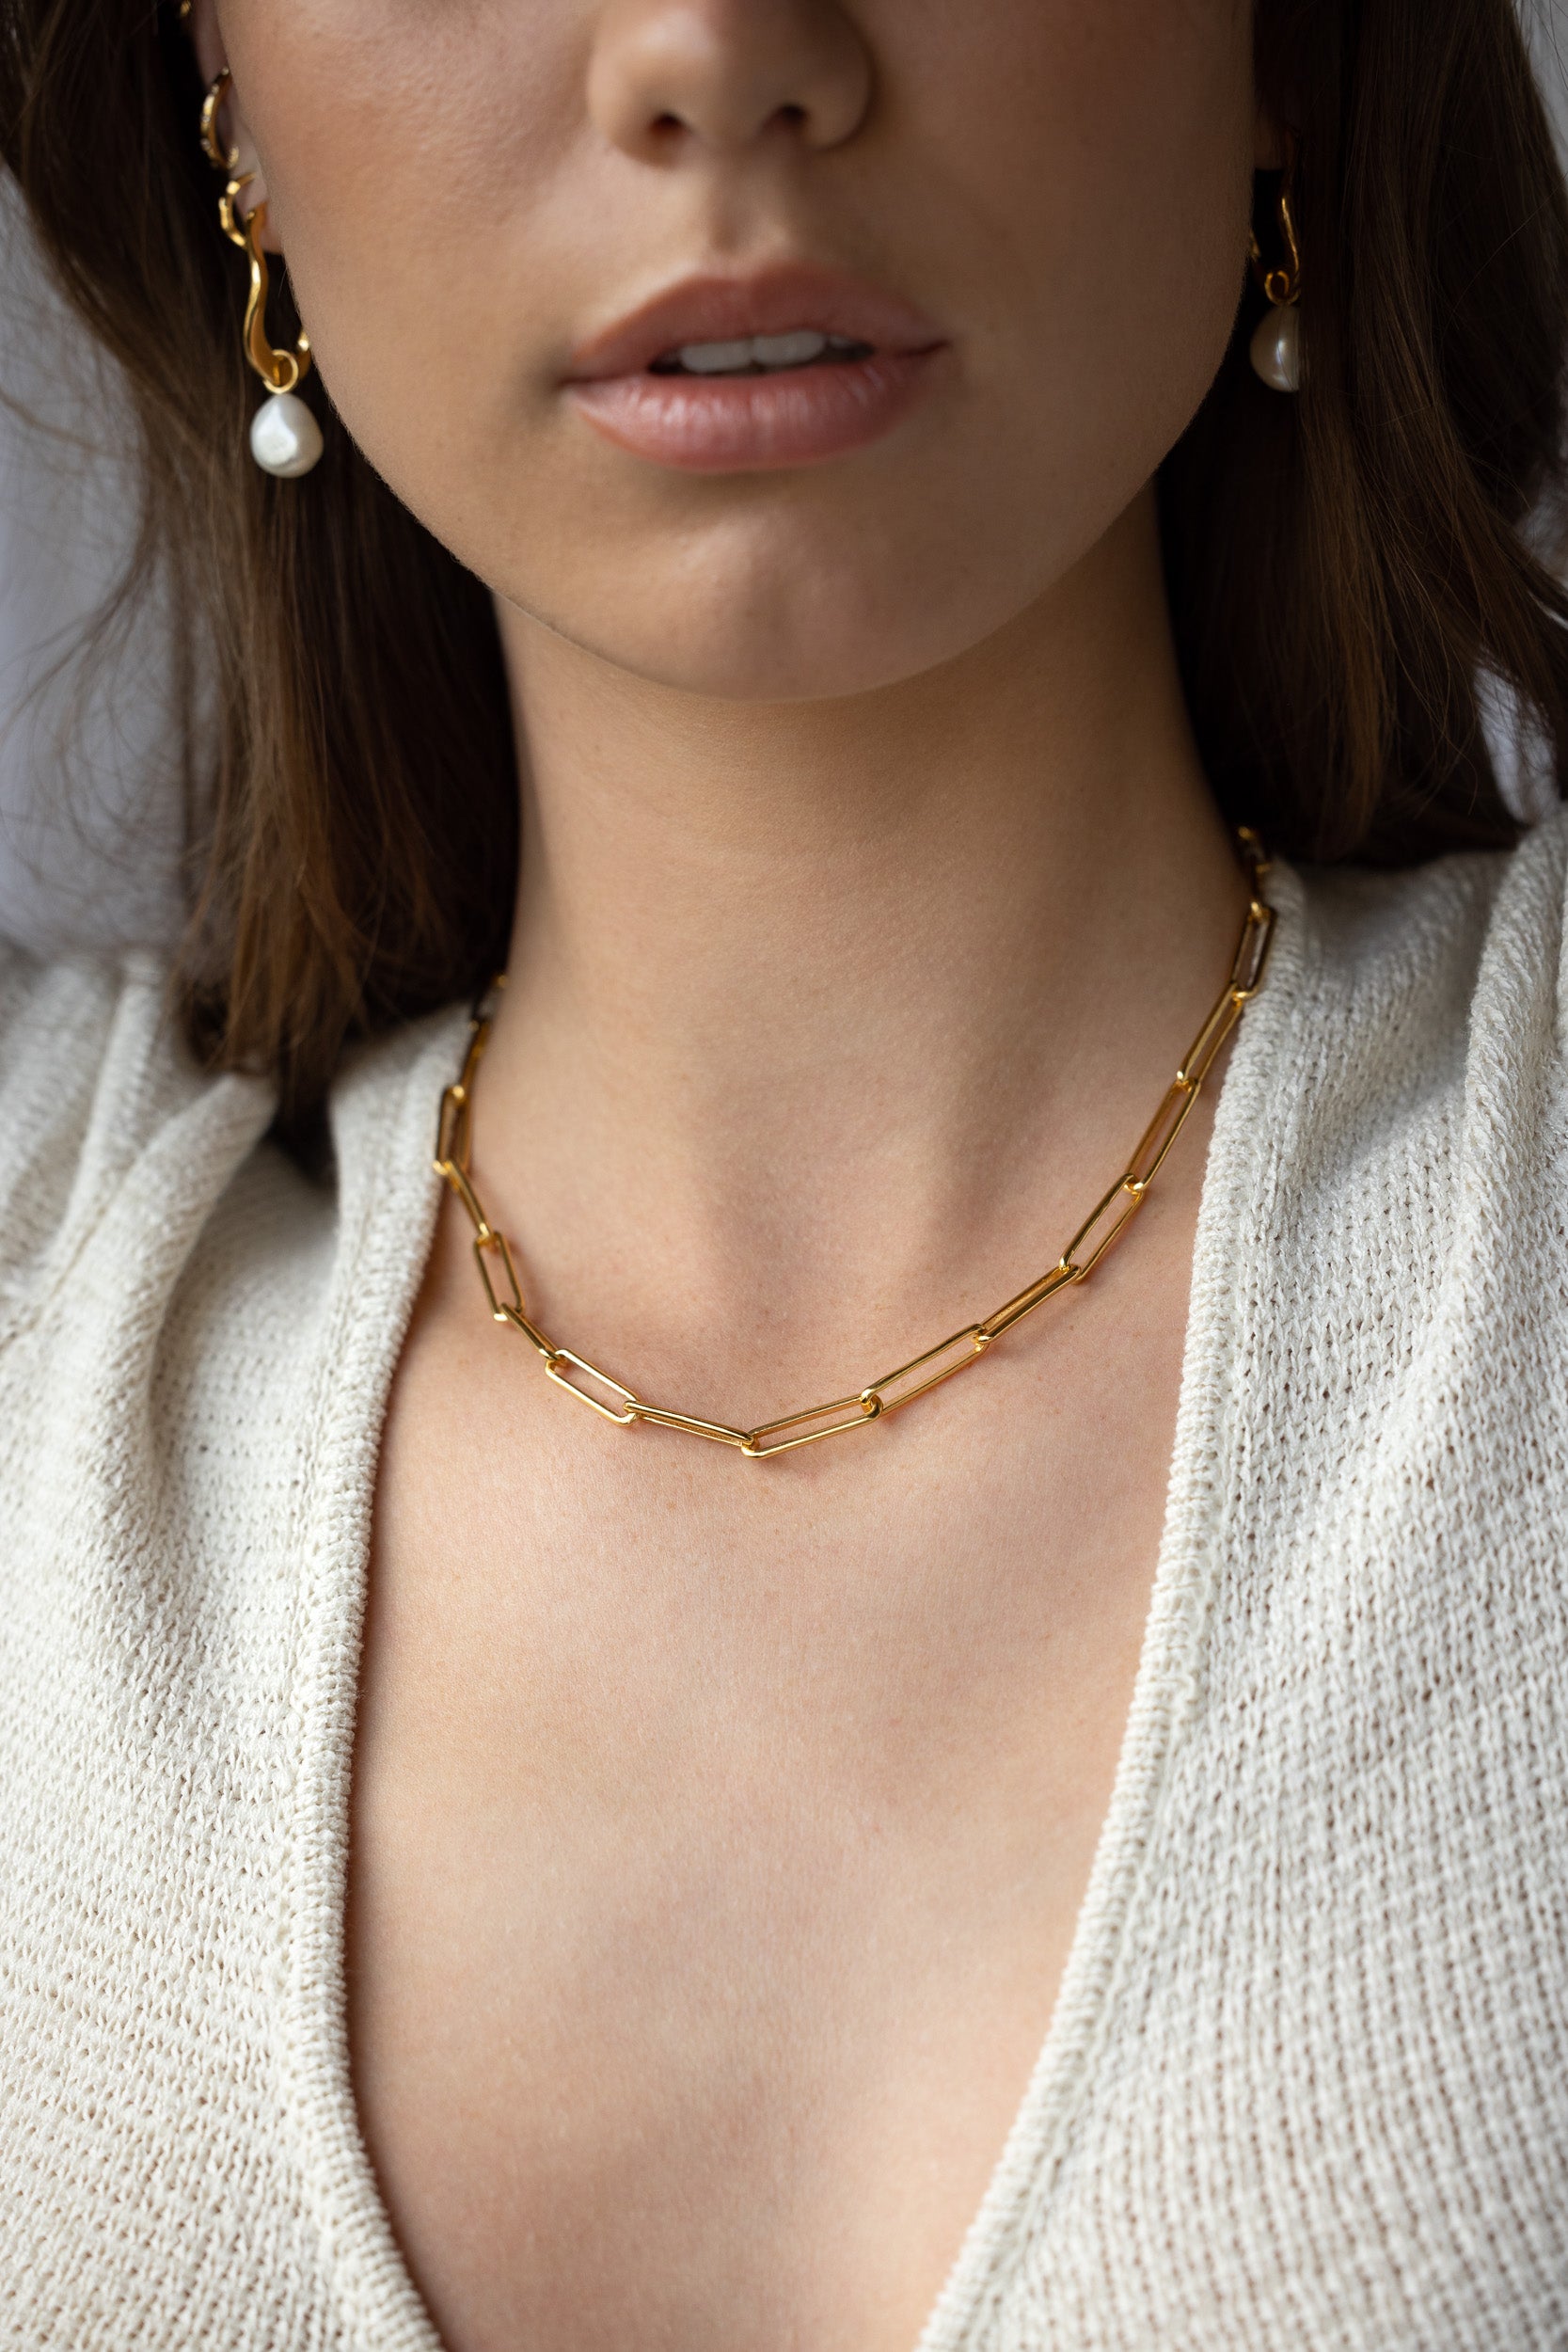 Flash Jewellery Horizon Chain Necklace in 14k Gold Vermeil on model